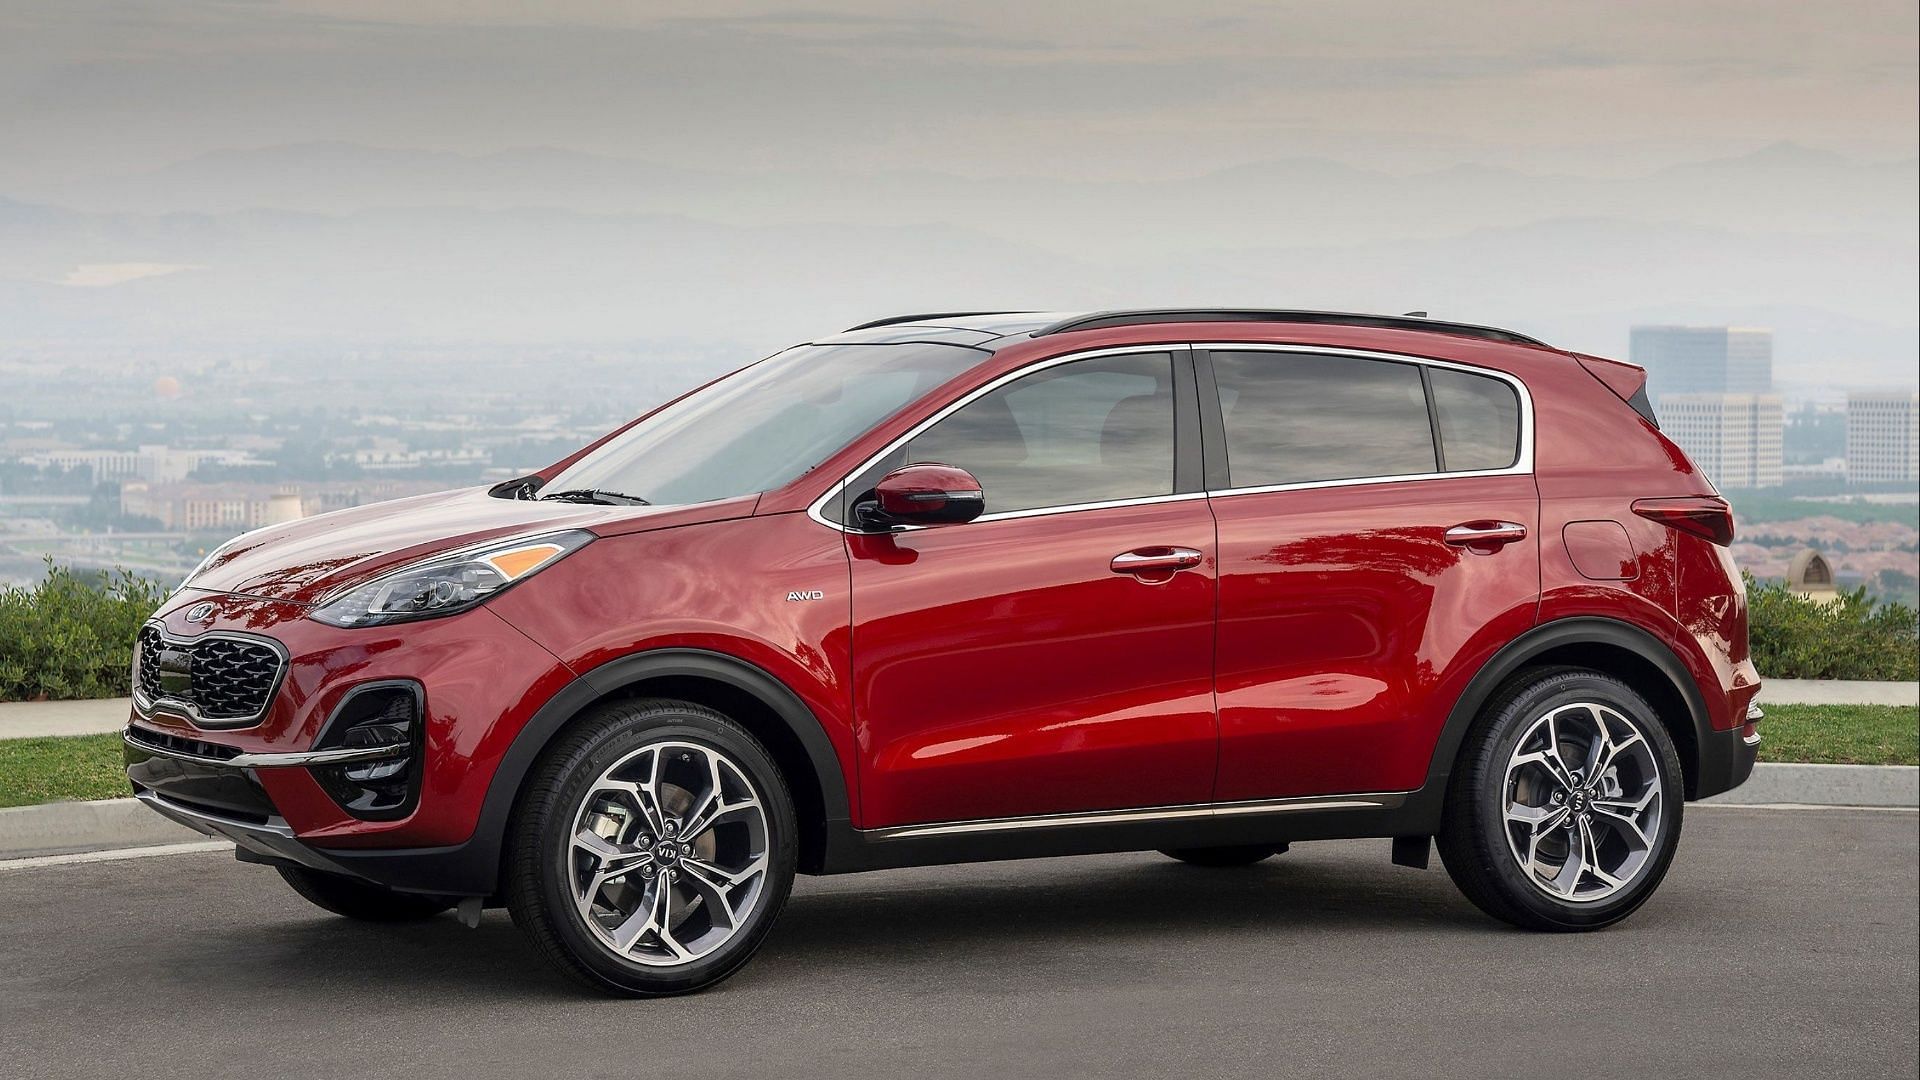 The recalled Kia Sportage 2023 model SUVs may have a problem with the power brake assist which poses crash risks (Image via Kia)